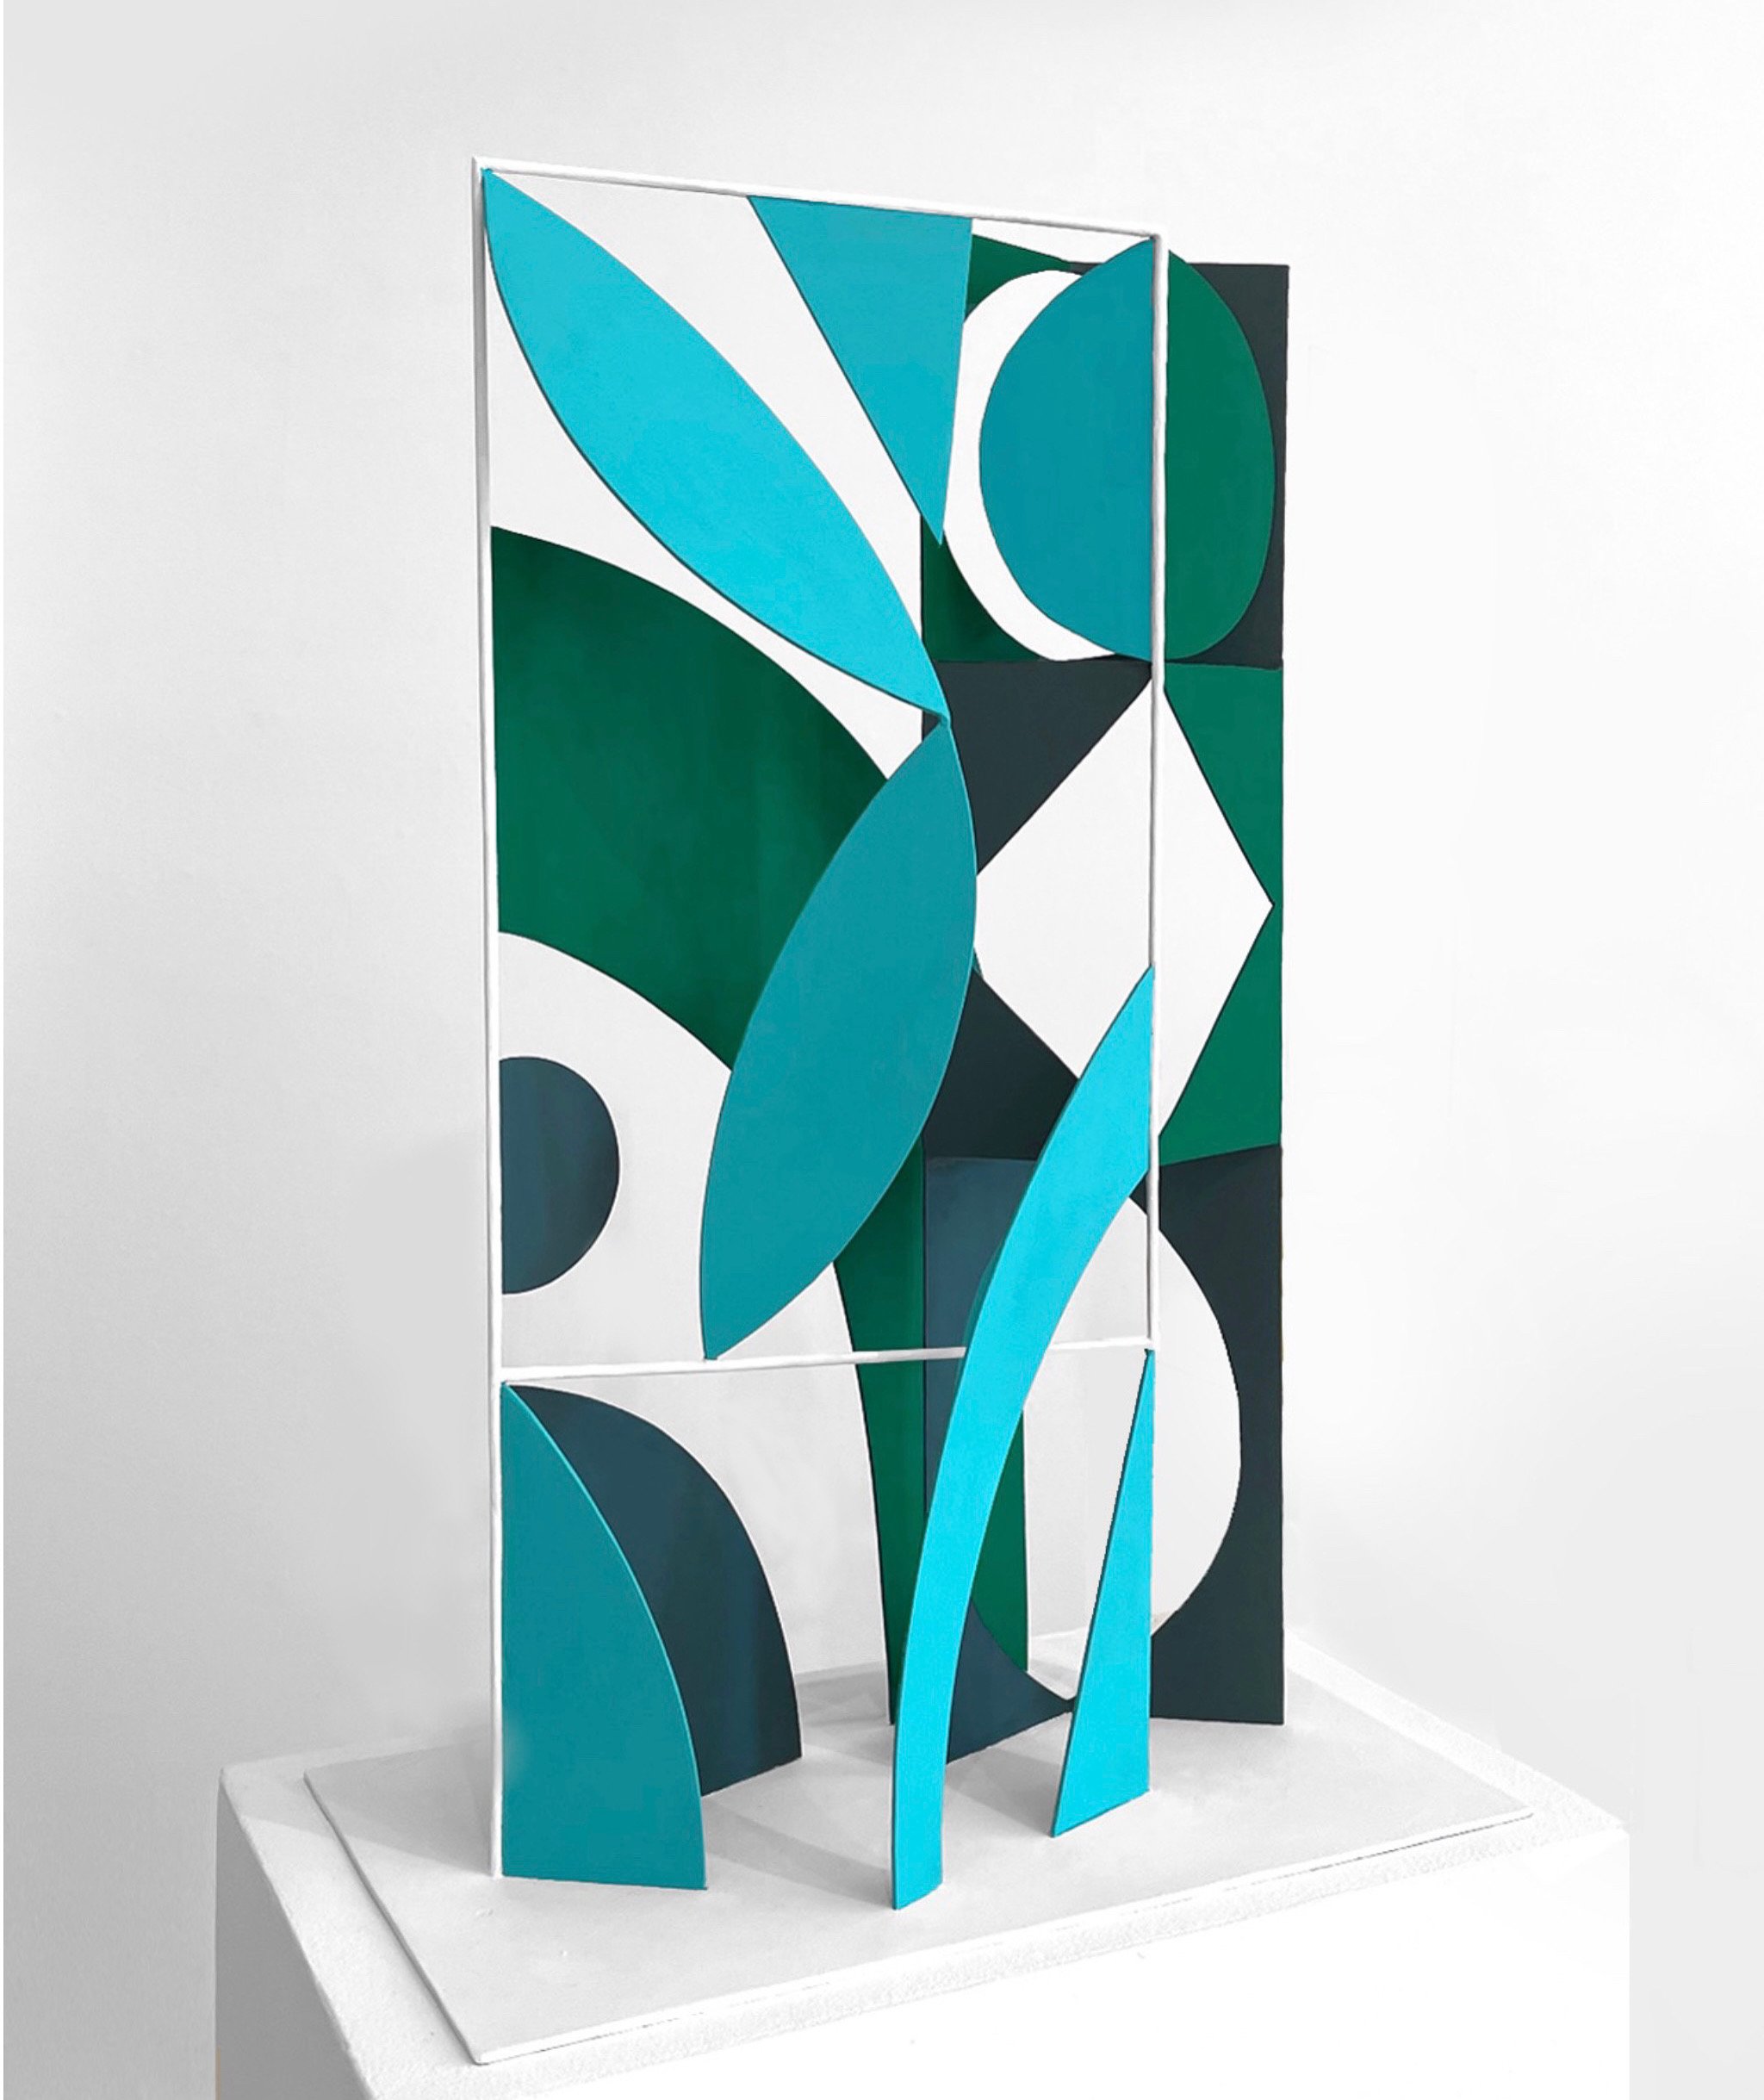    Moonflower Masquerade  , 2022. 19.5” x 13” x 7.5”, painted steel. 